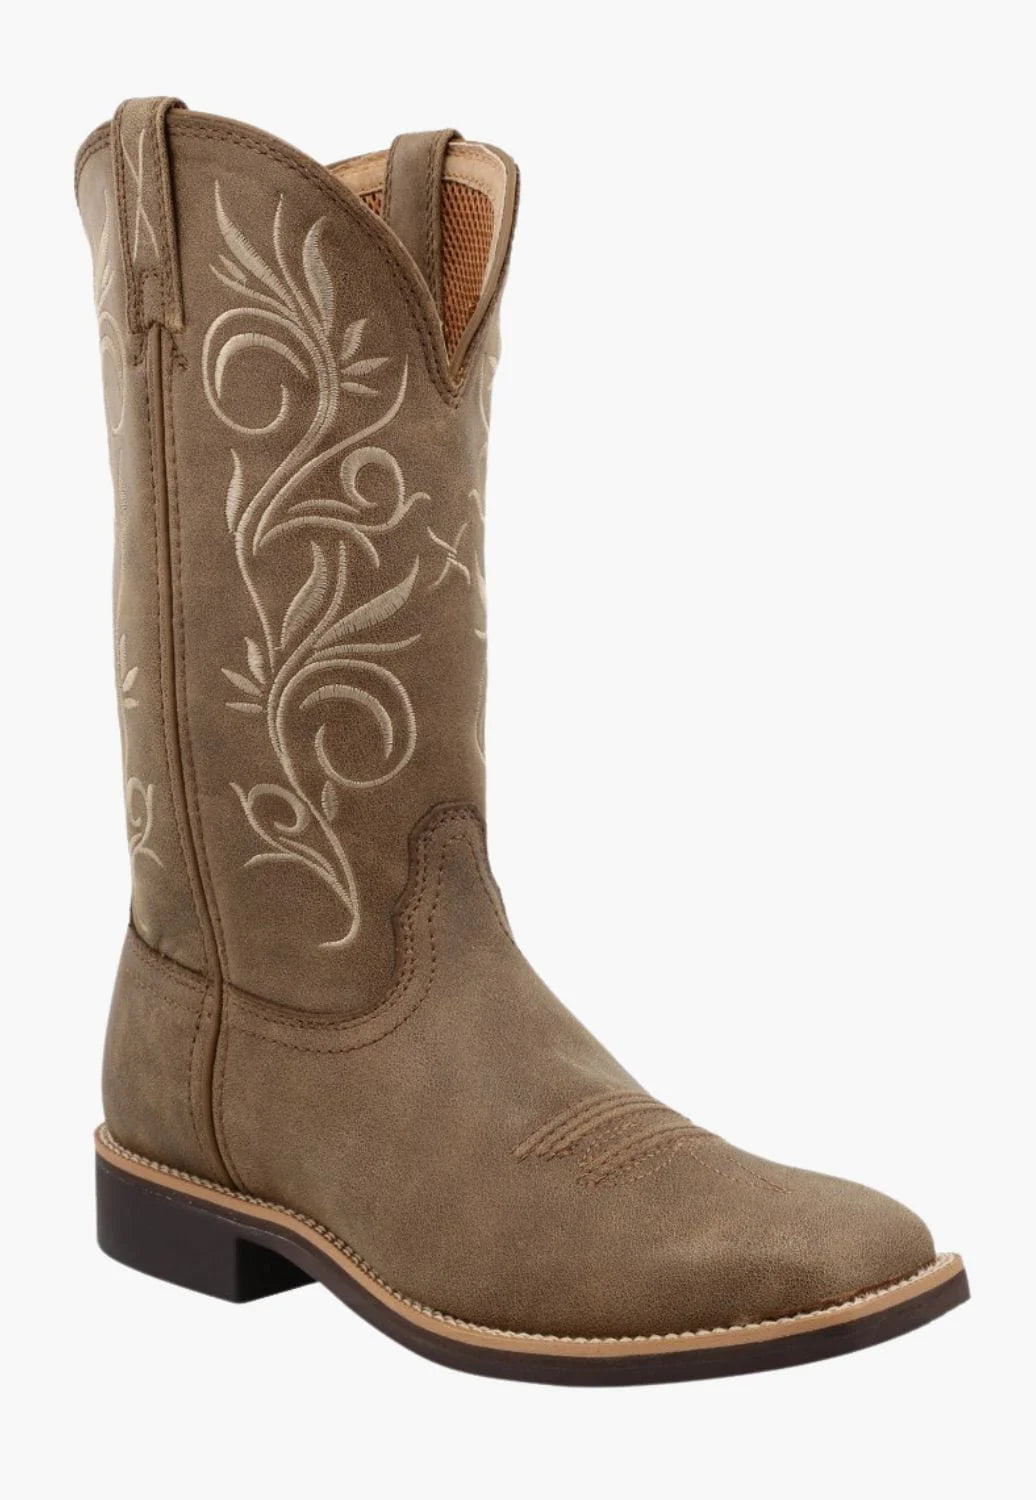 11inch top hand boots